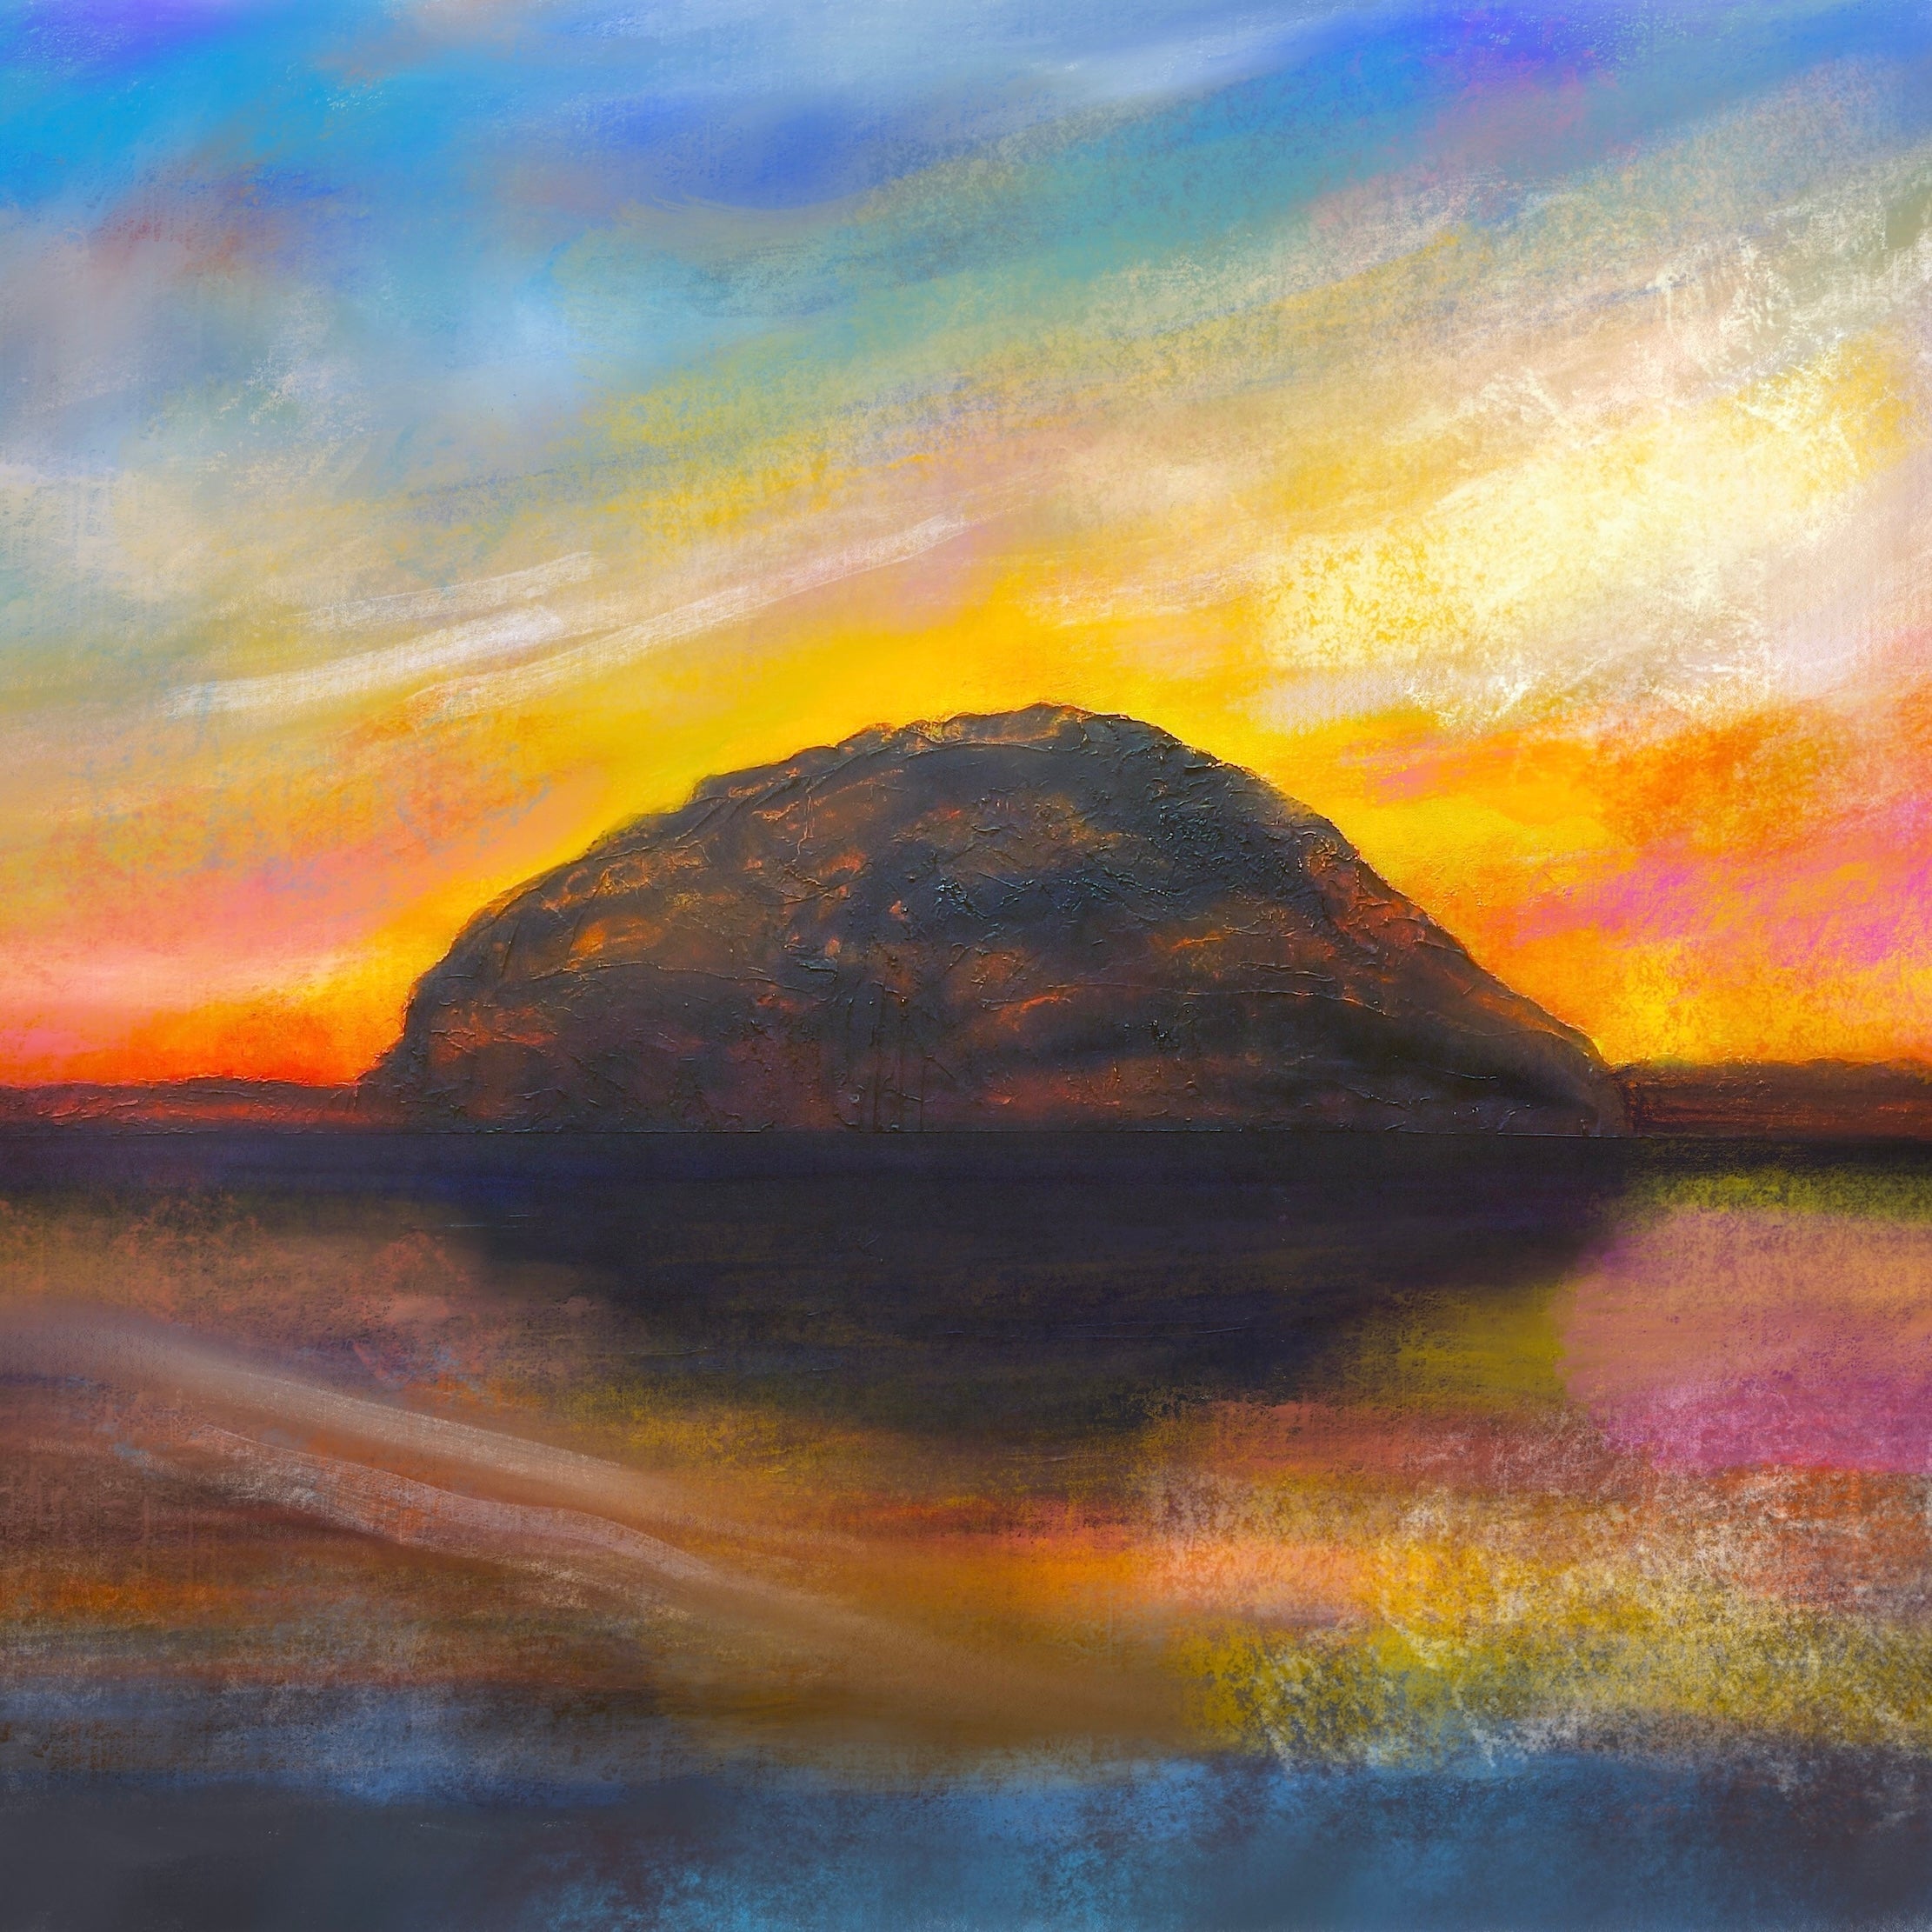 Ailsa Craig Dusk Arran | Scotland In Your Pocket Art Print-Scotland In Your Pocket Framed Prints-Arran Art Gallery-Paintings, Prints, Homeware, Art Gifts From Scotland By Scottish Artist Kevin Hunter